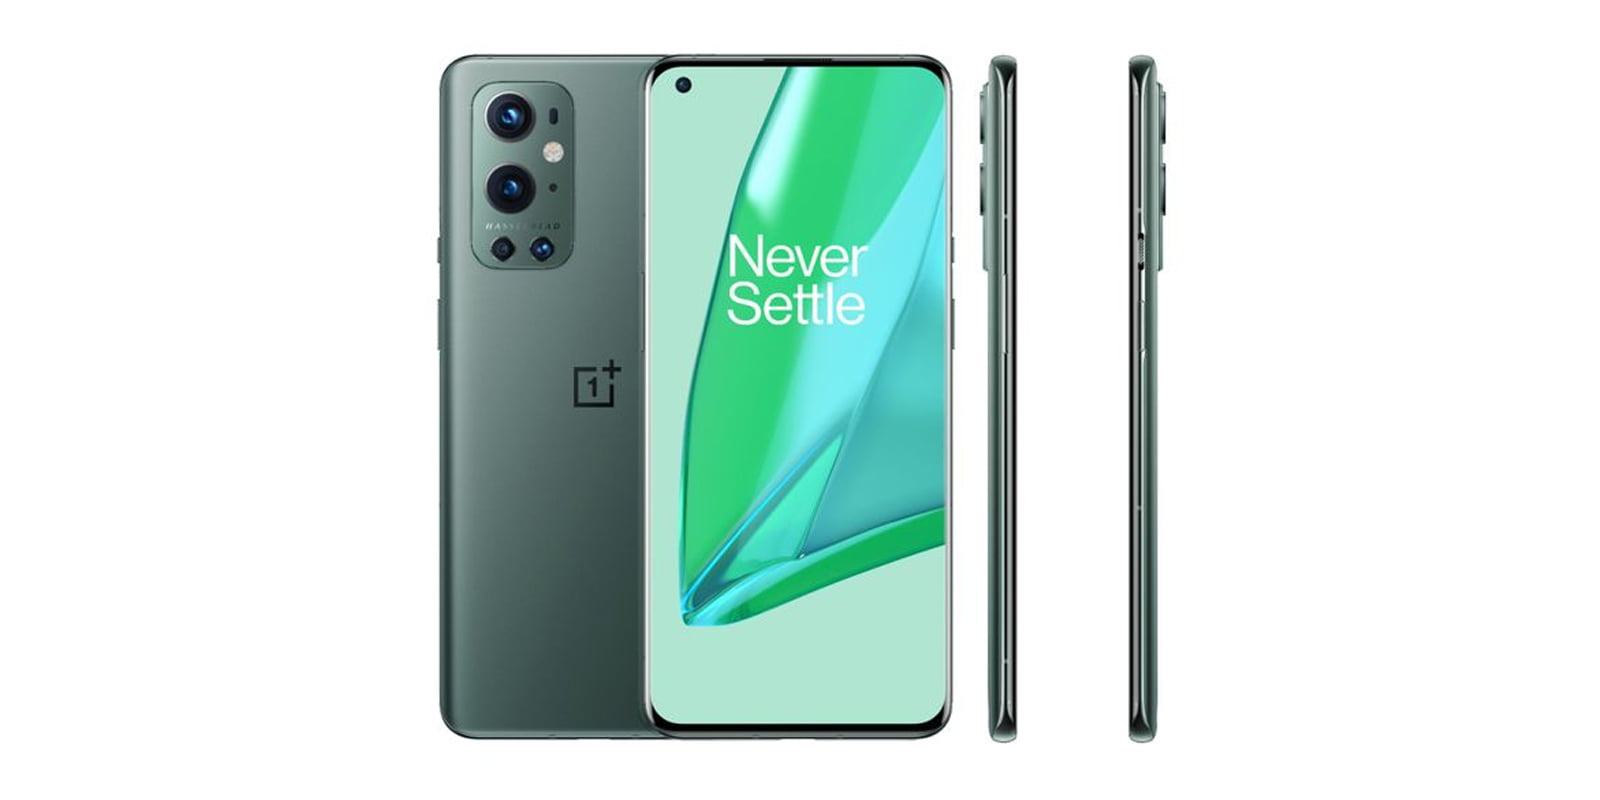 What to expect from the OnePlus 9 launch event - TechEngage